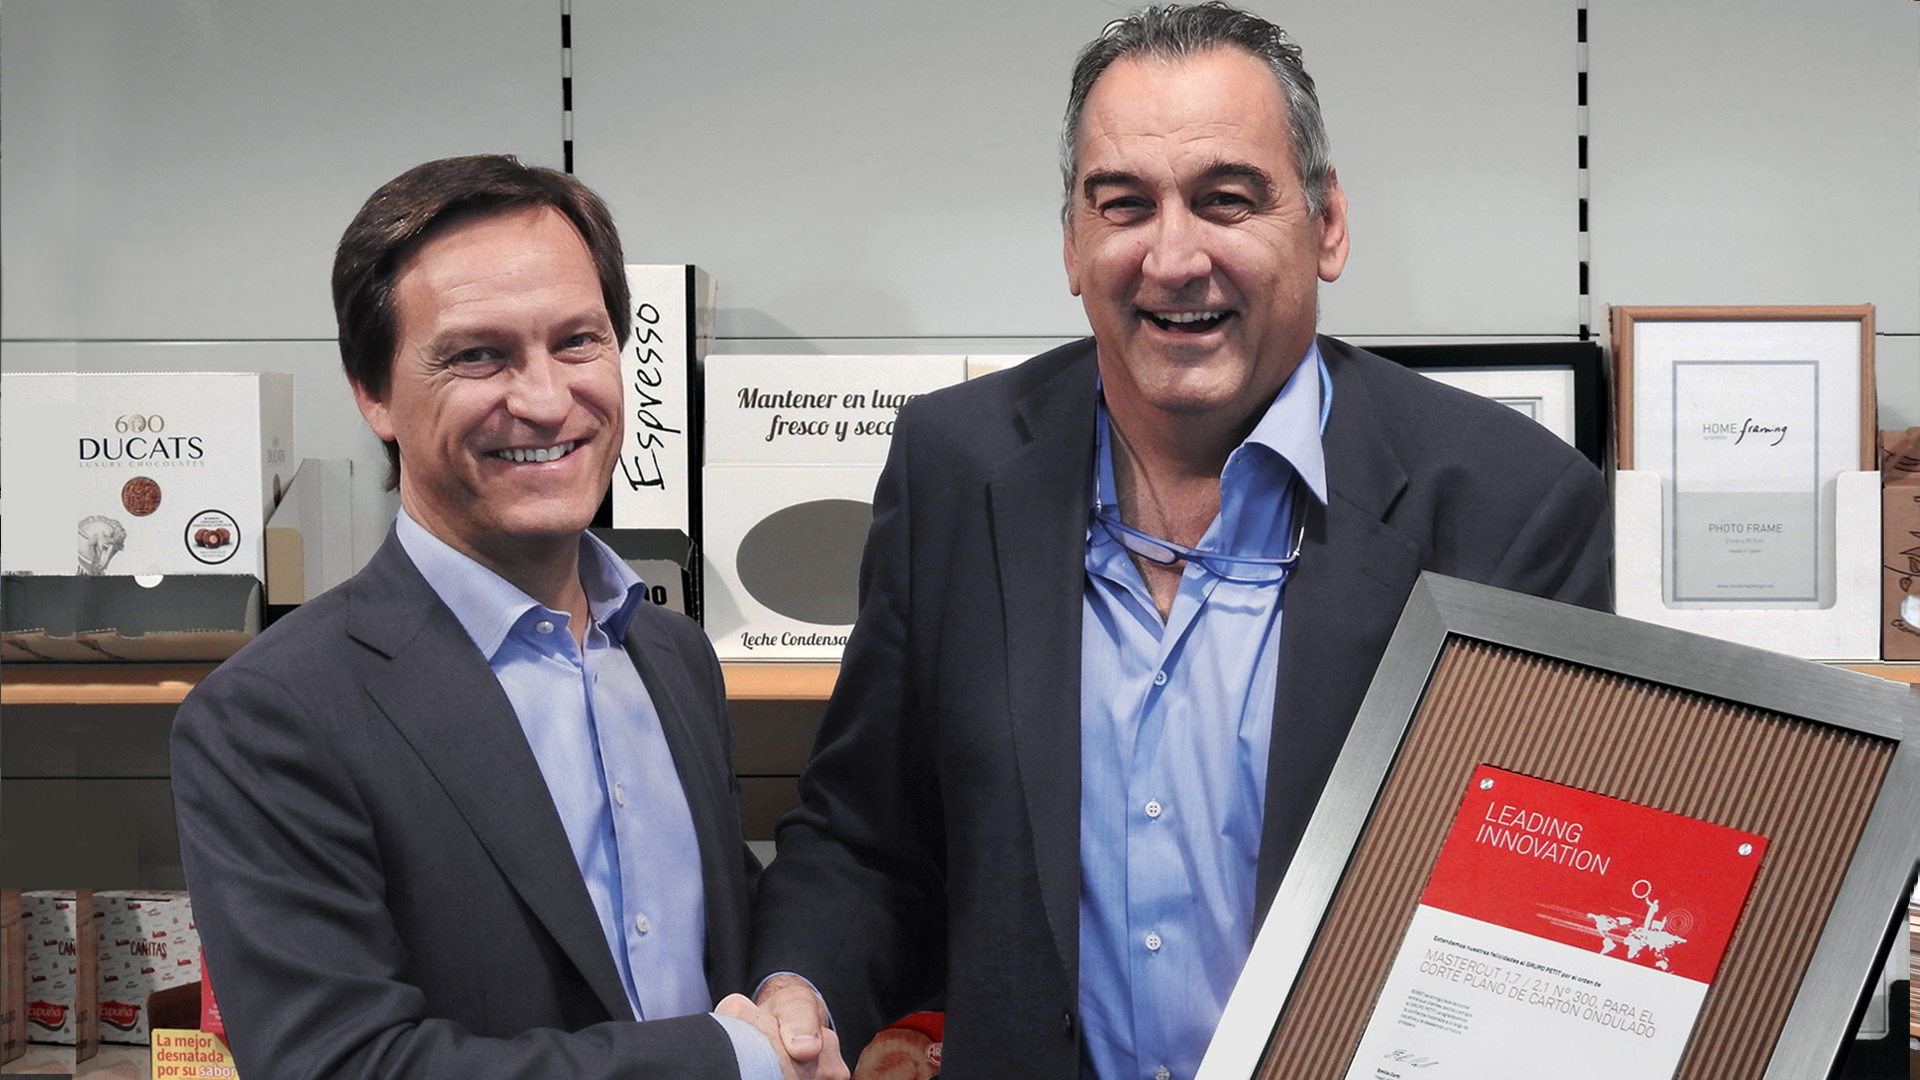 BOBST has sold its 300th iconic die-cutter MASTERCUT